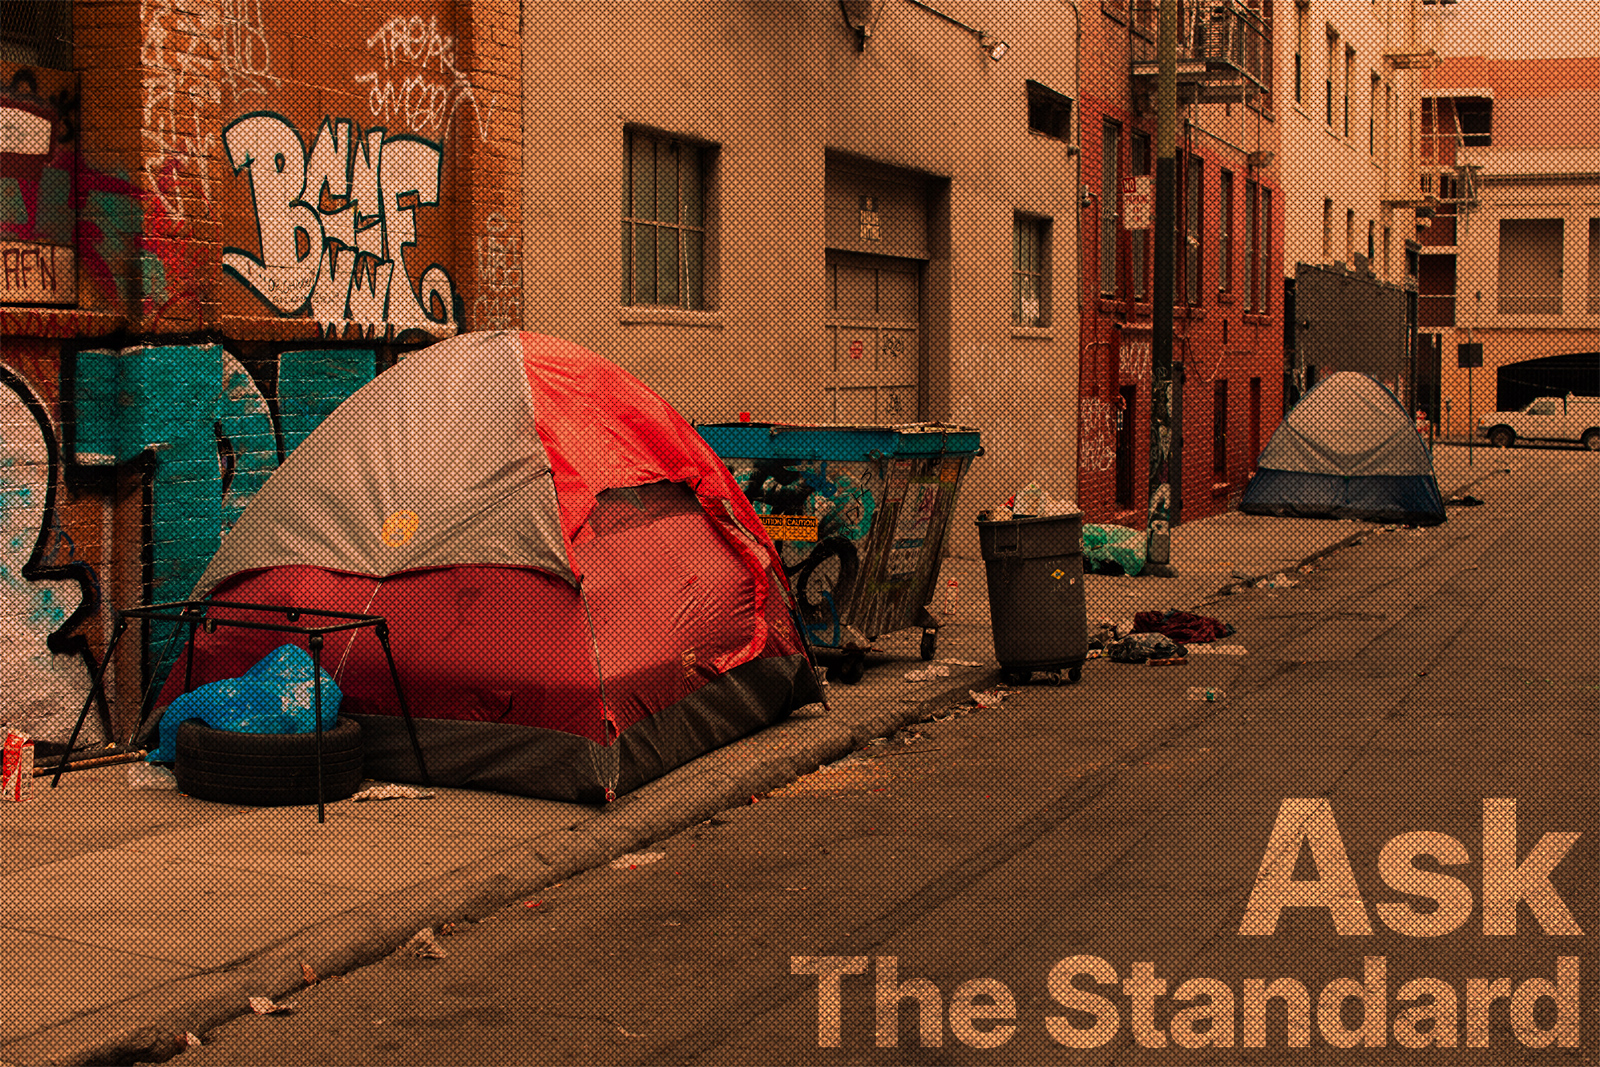 Ask The Standard: Share Your Questions About Homelessness